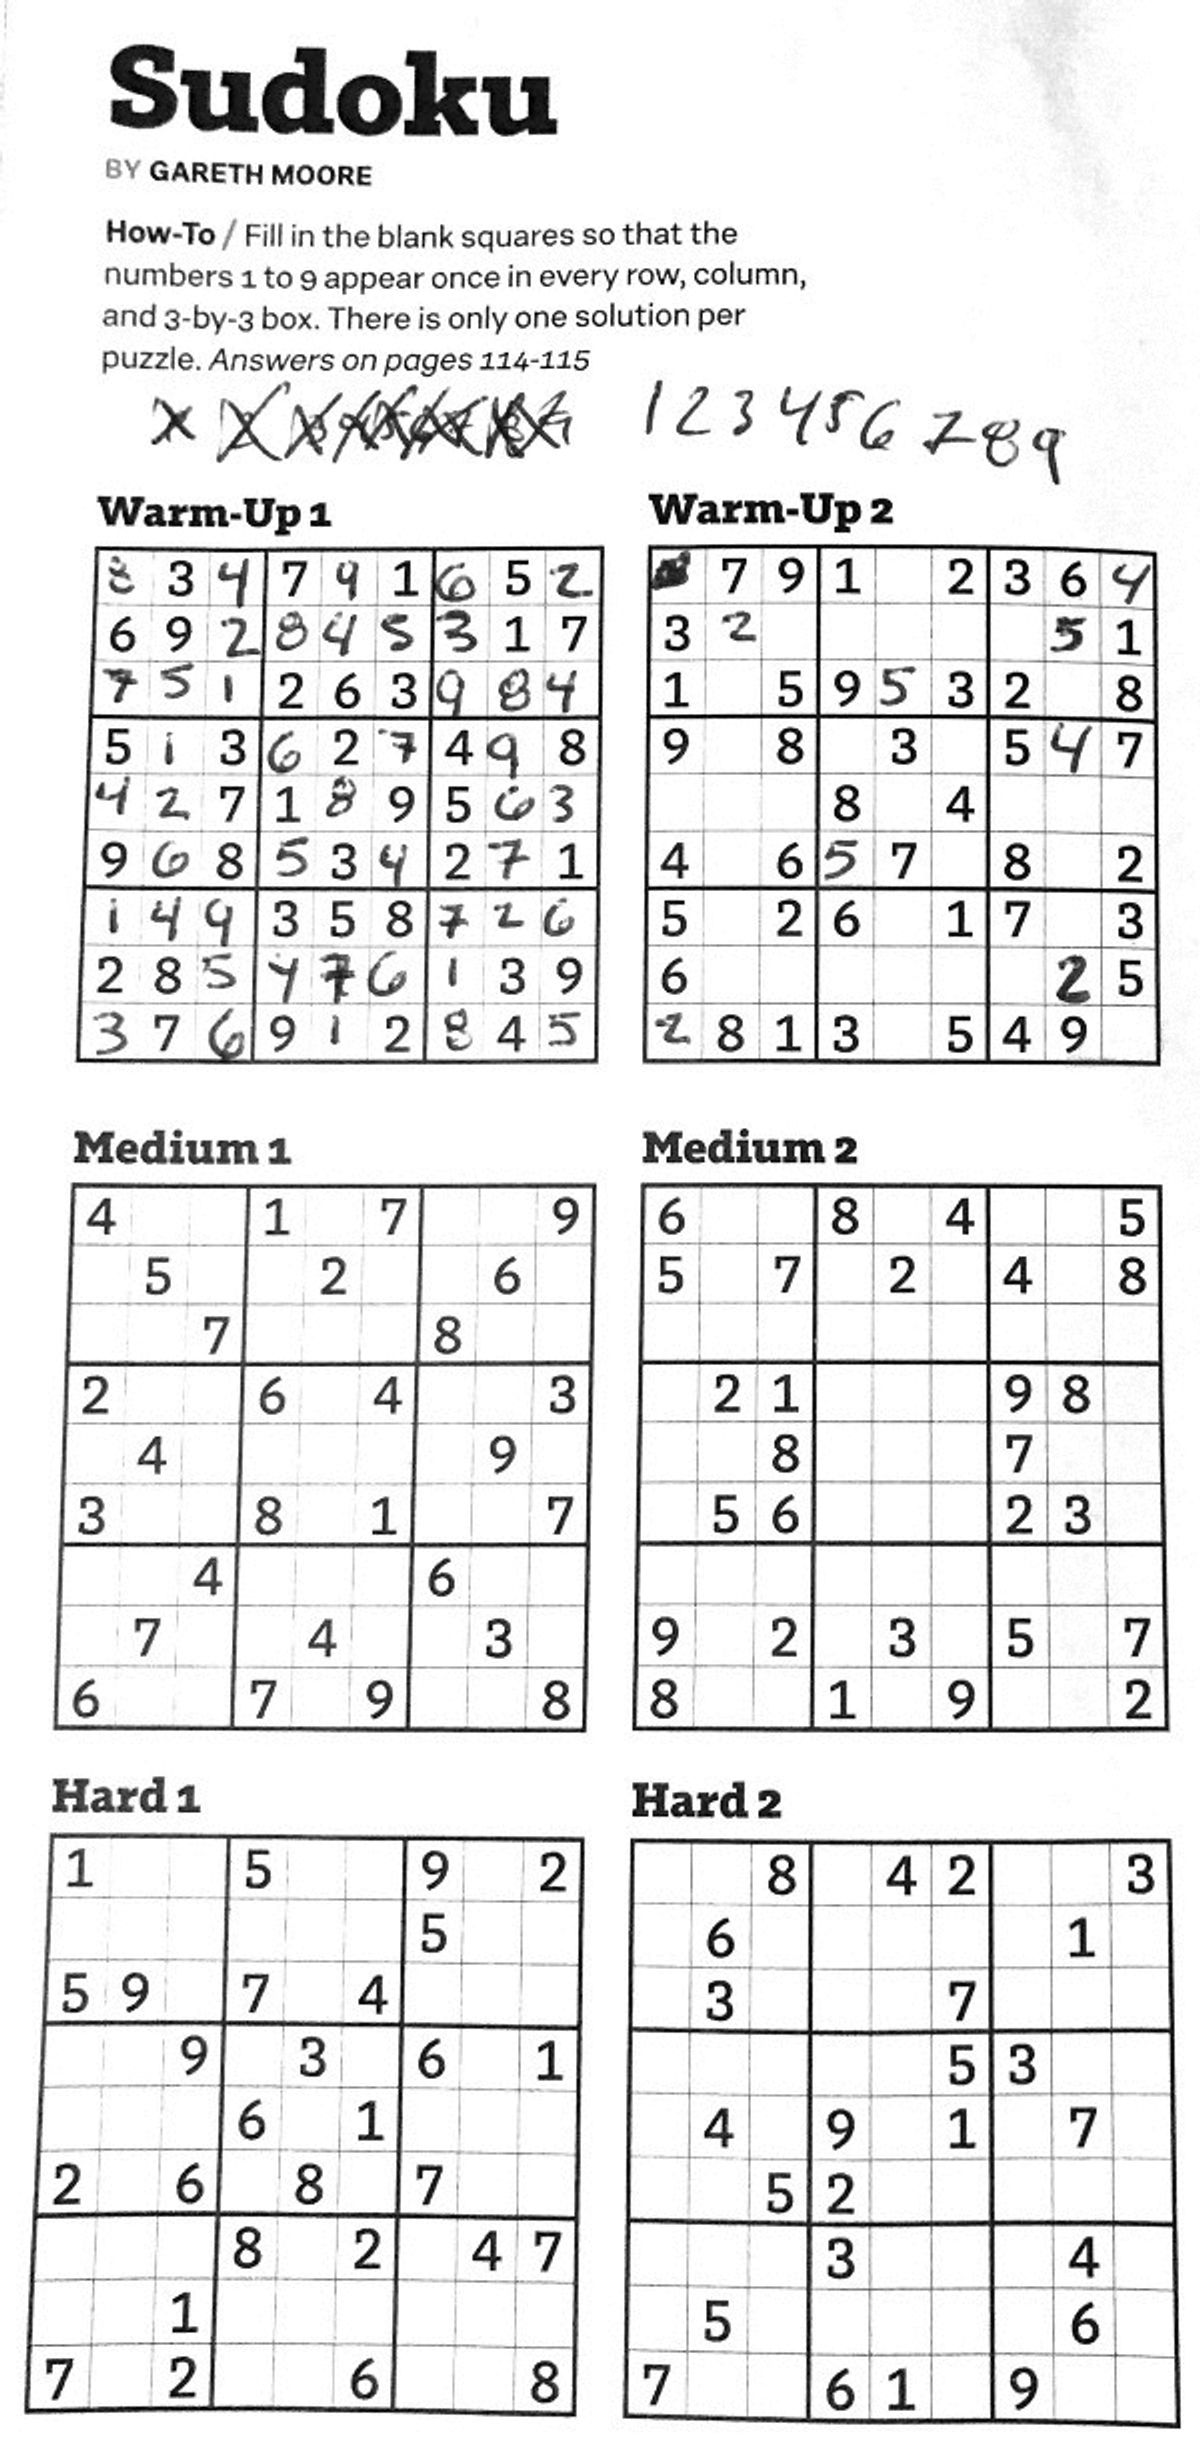 How to use Integer Linear Puzzling to Attain Sudoku Fame & Fortune